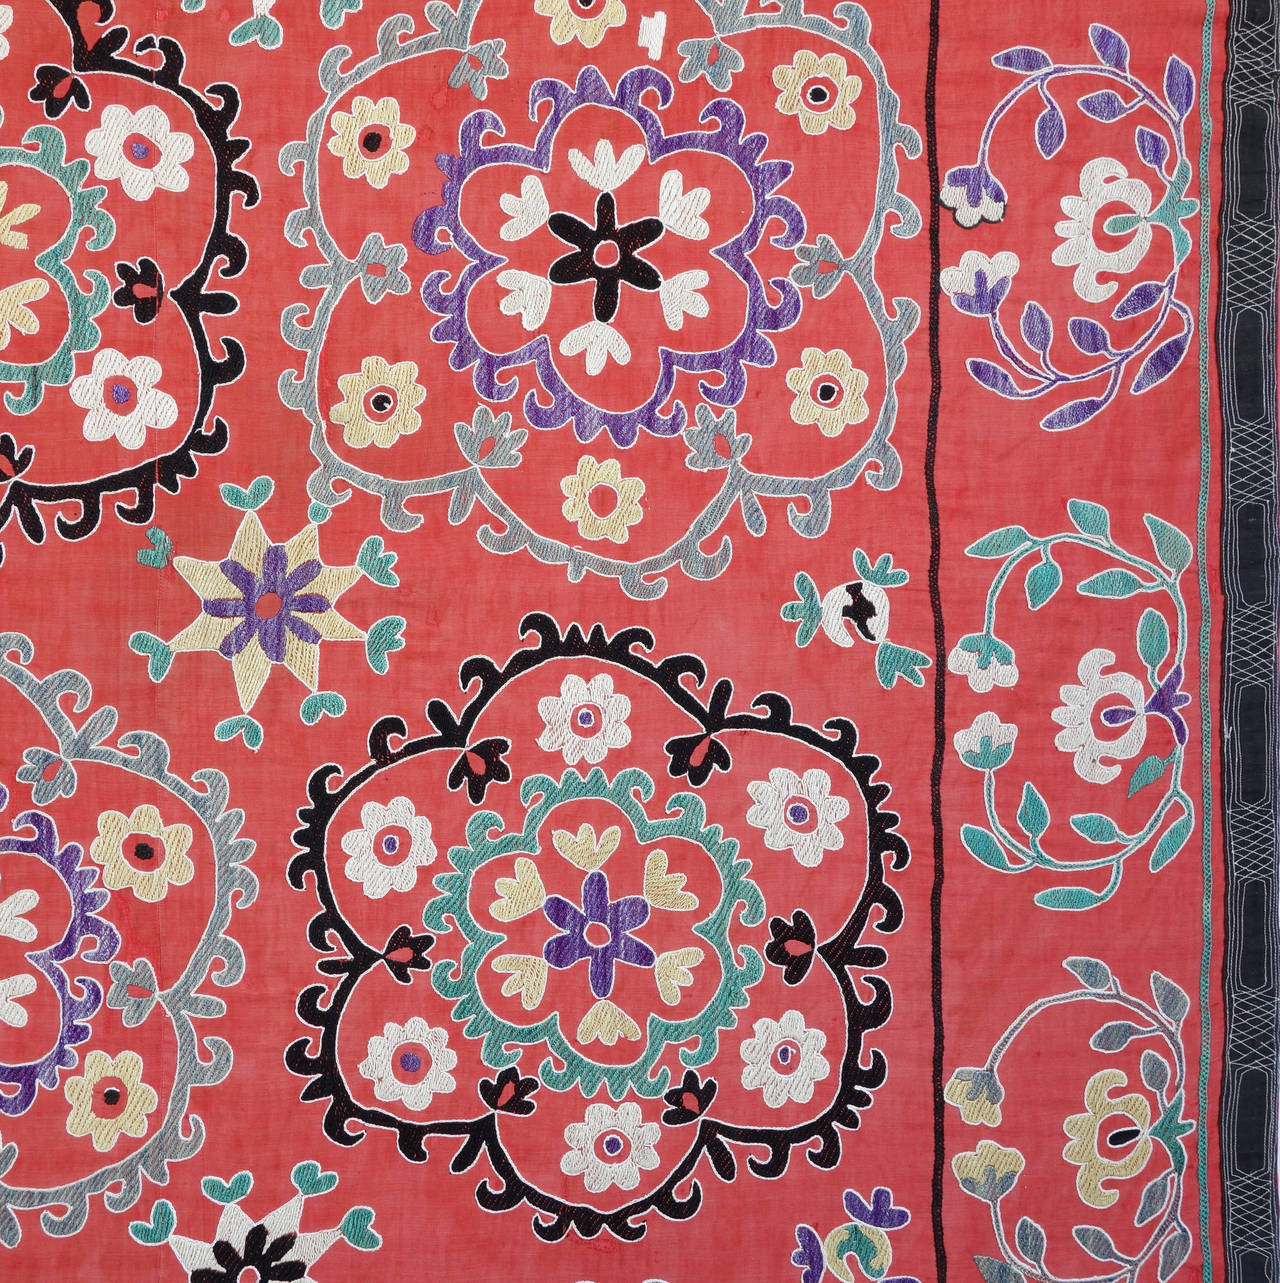 Suzanis were traditionally made by Central Asian brides as part of their dowry and presented to the groom on their wedding day. This is a wonderfully graphic example, with 16 large floral medallions alternating between black and green and purple and